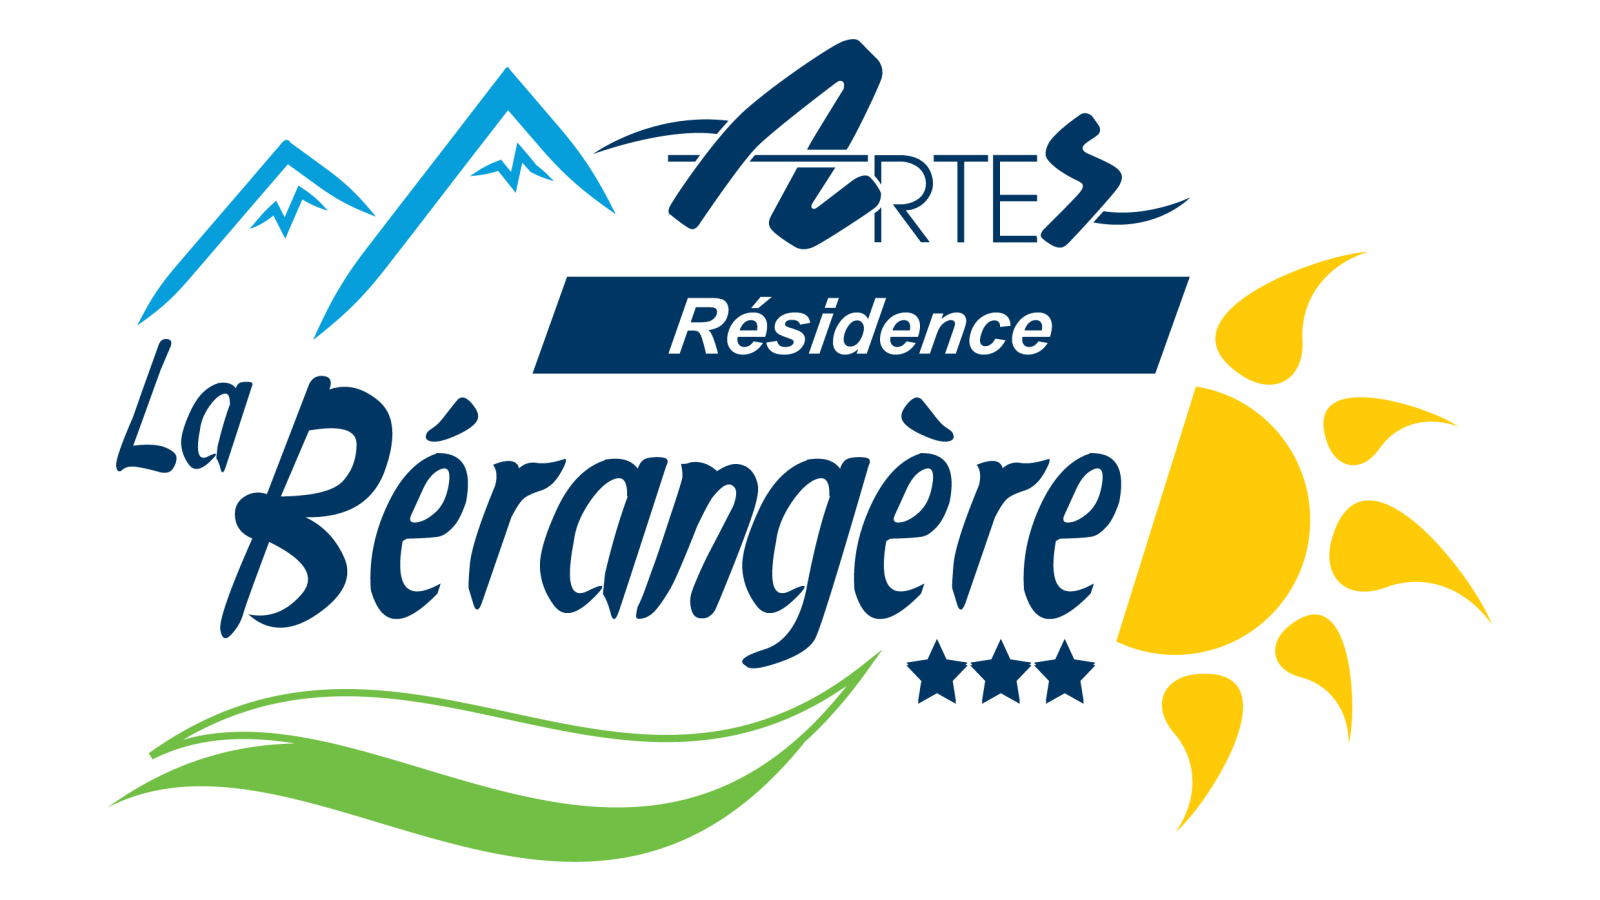 Picture of the Bérangère residence logo